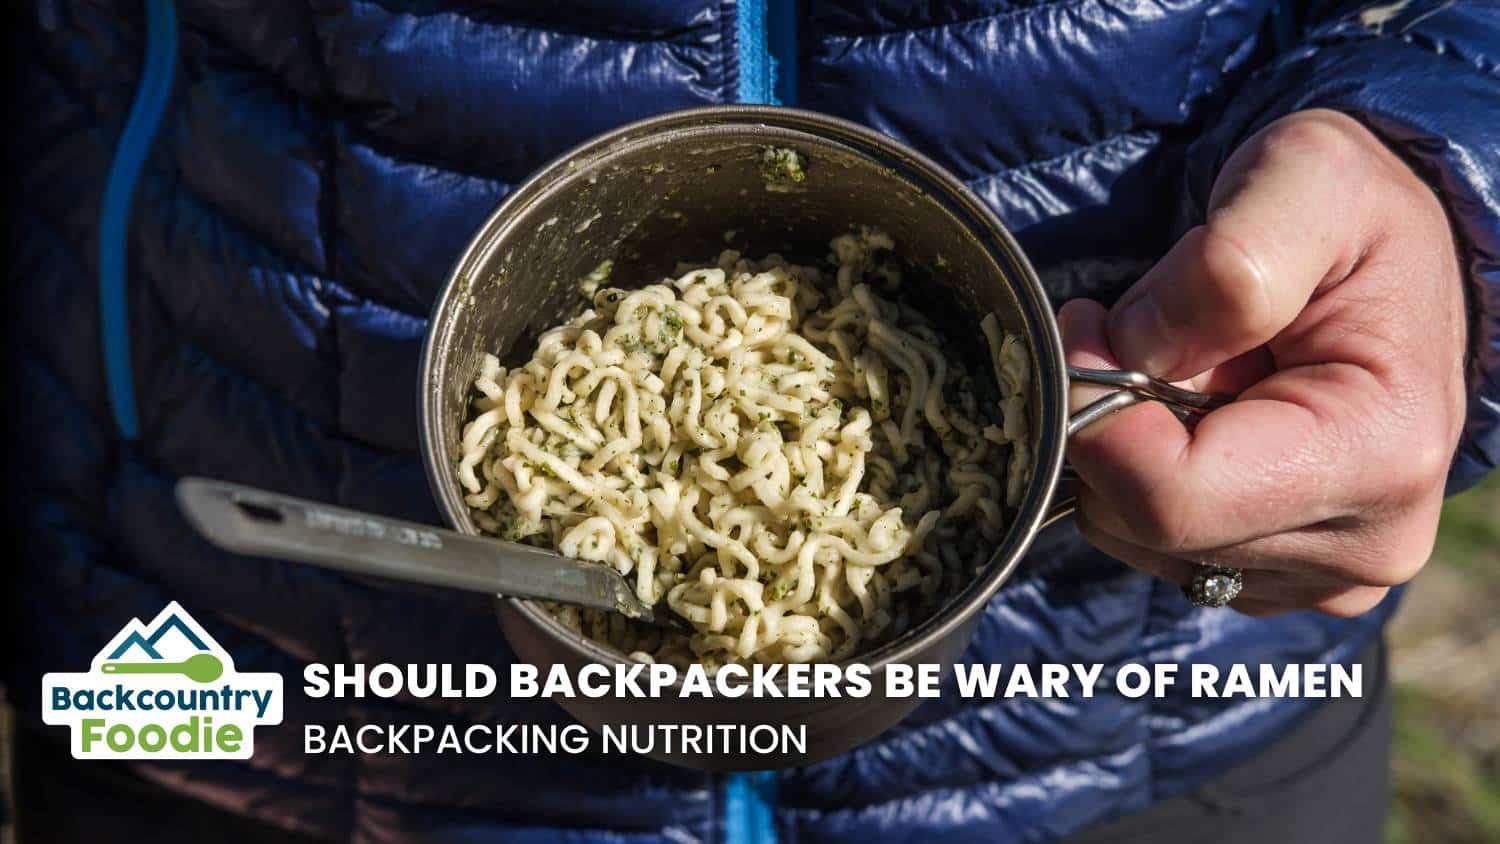 Backcountry Foodie Should Backpackers Be Wary of Ramen Noodles Backpacking Nutrition blog thumbnail image